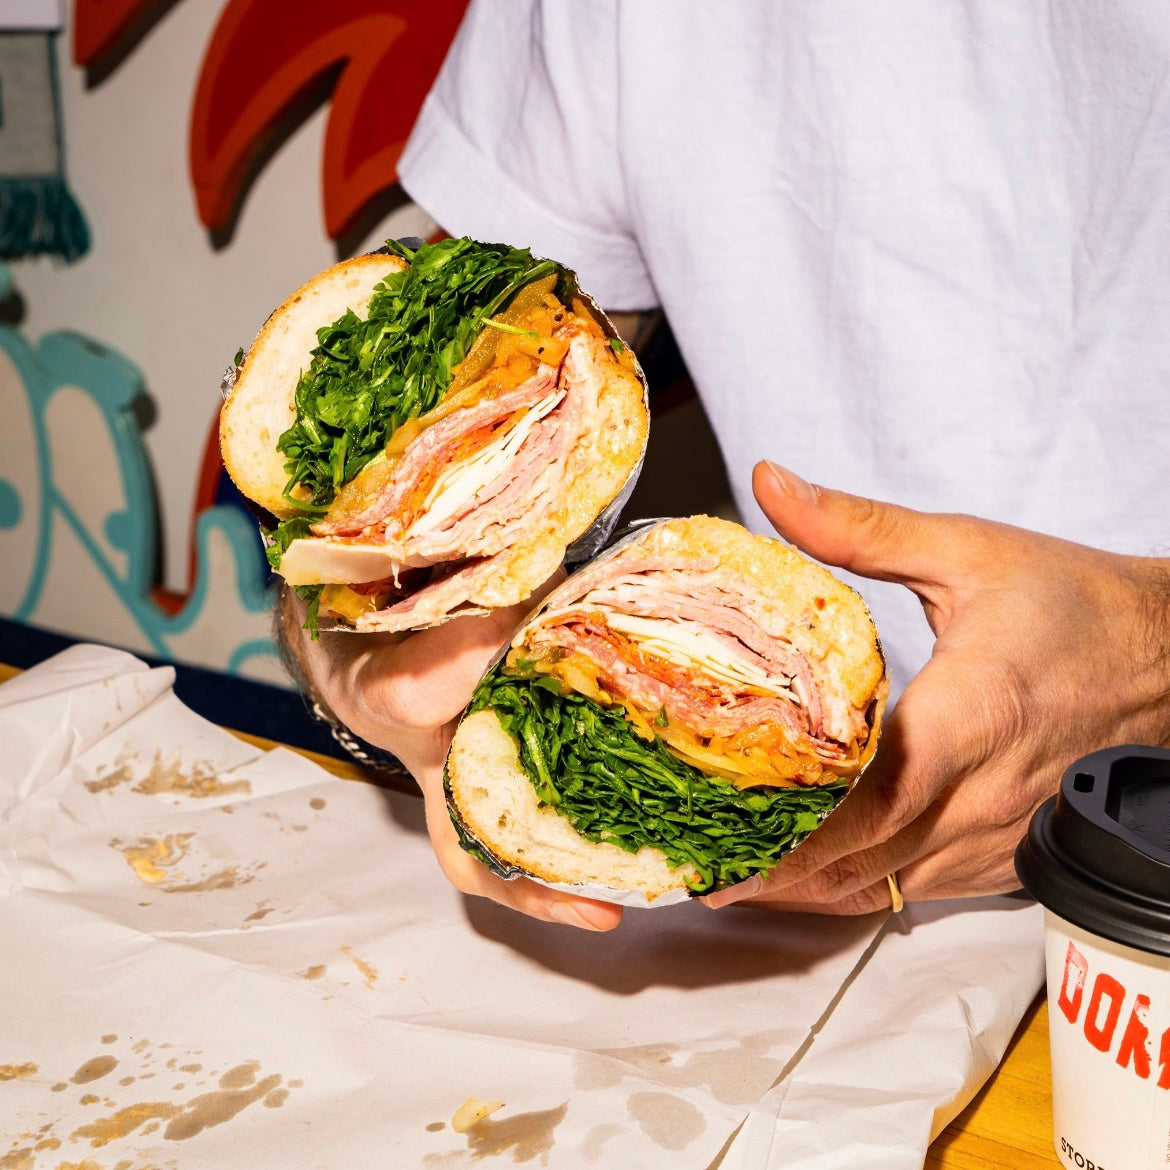 A GUIDE TO THE BEST SANDWICHES IN LONDON